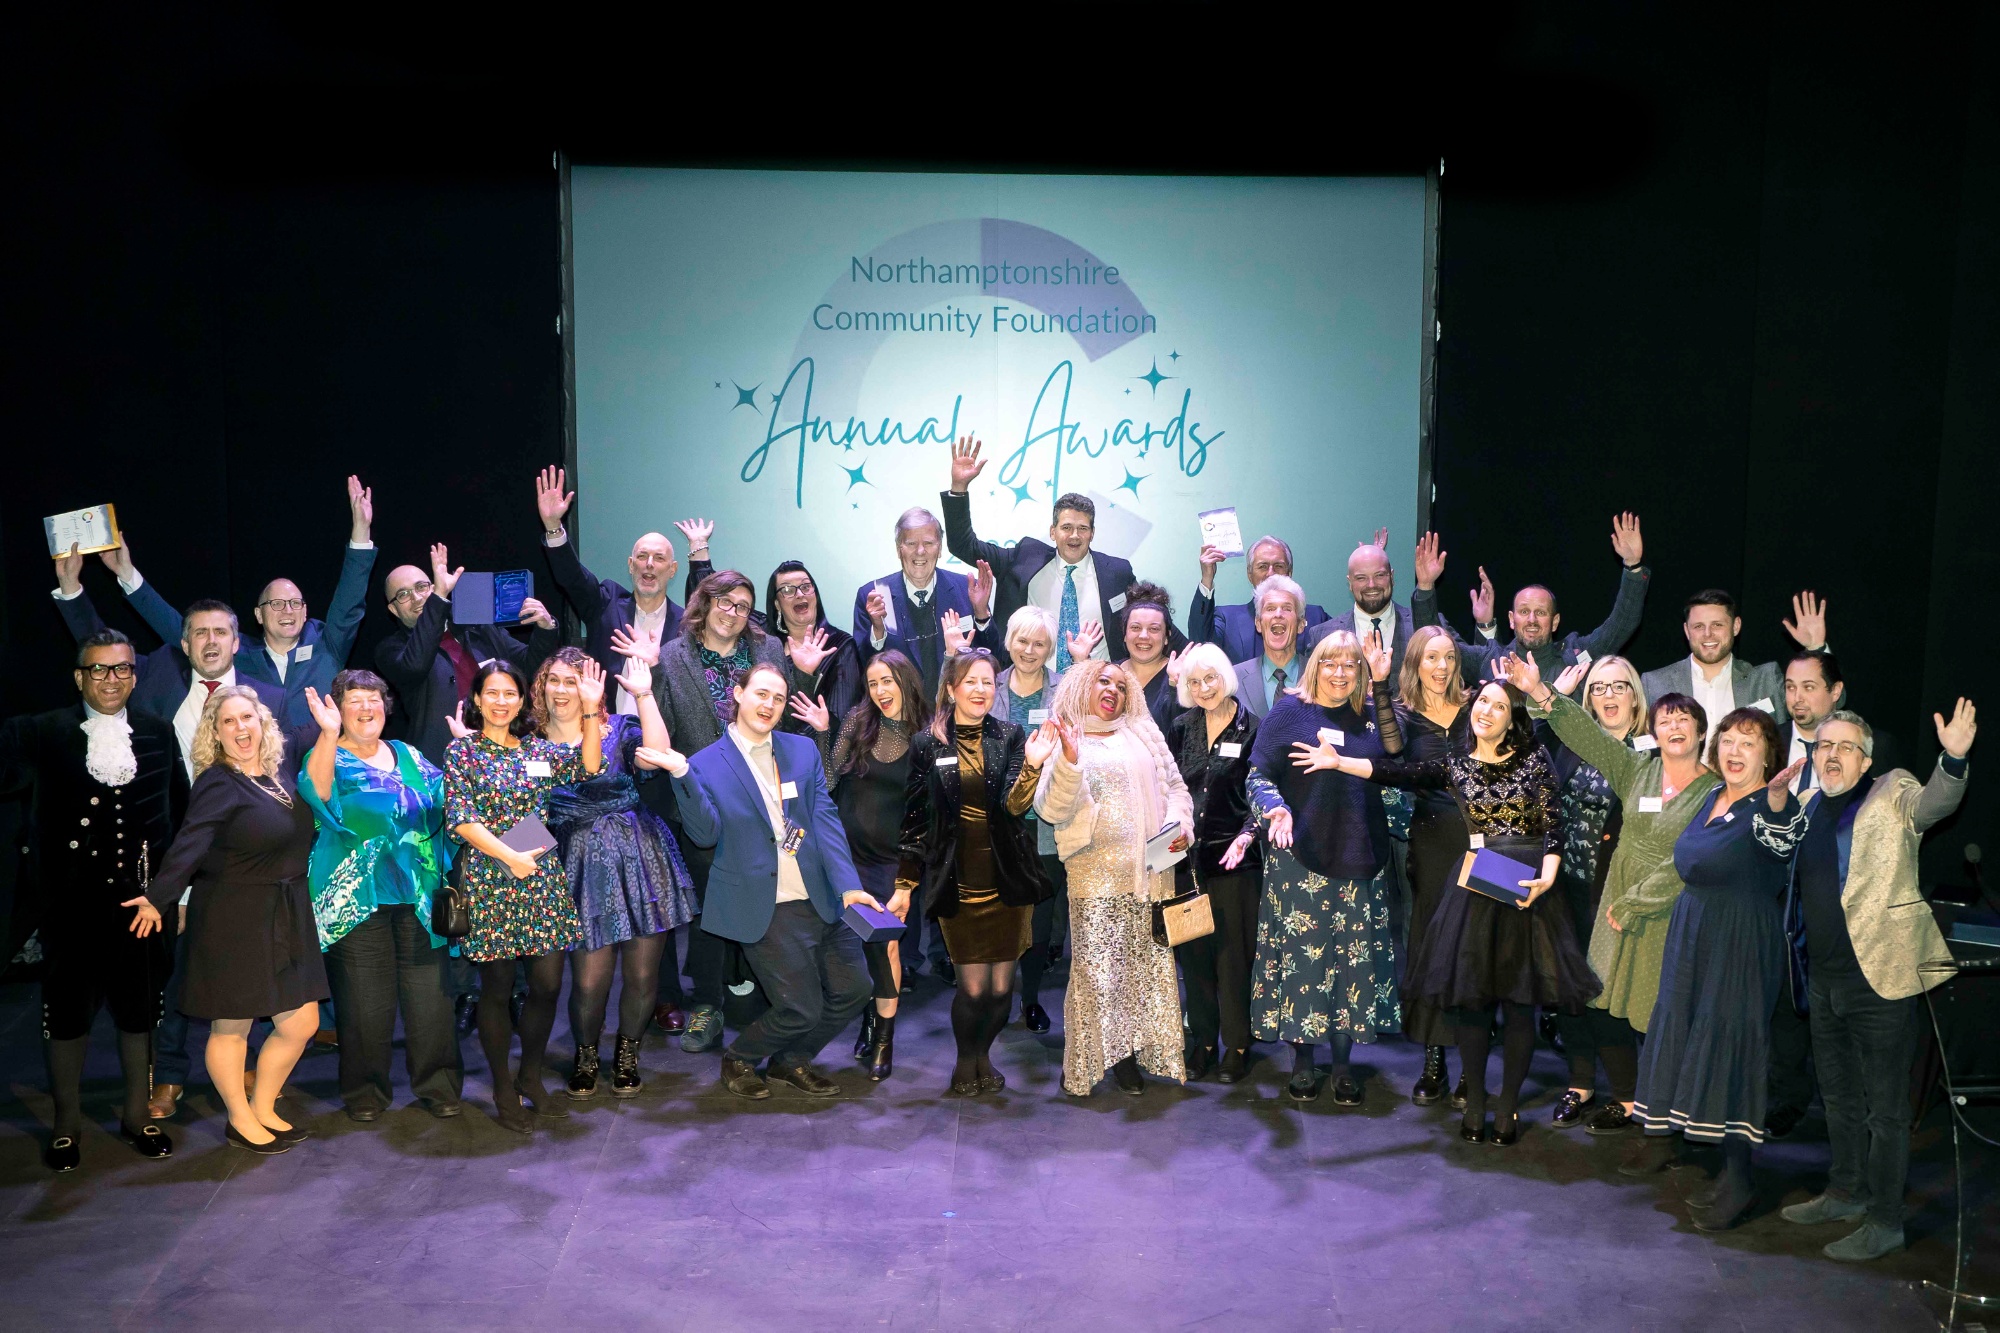 Award winners and judges on stage at the Royal Theatre, celebrating after the Annual Awards event